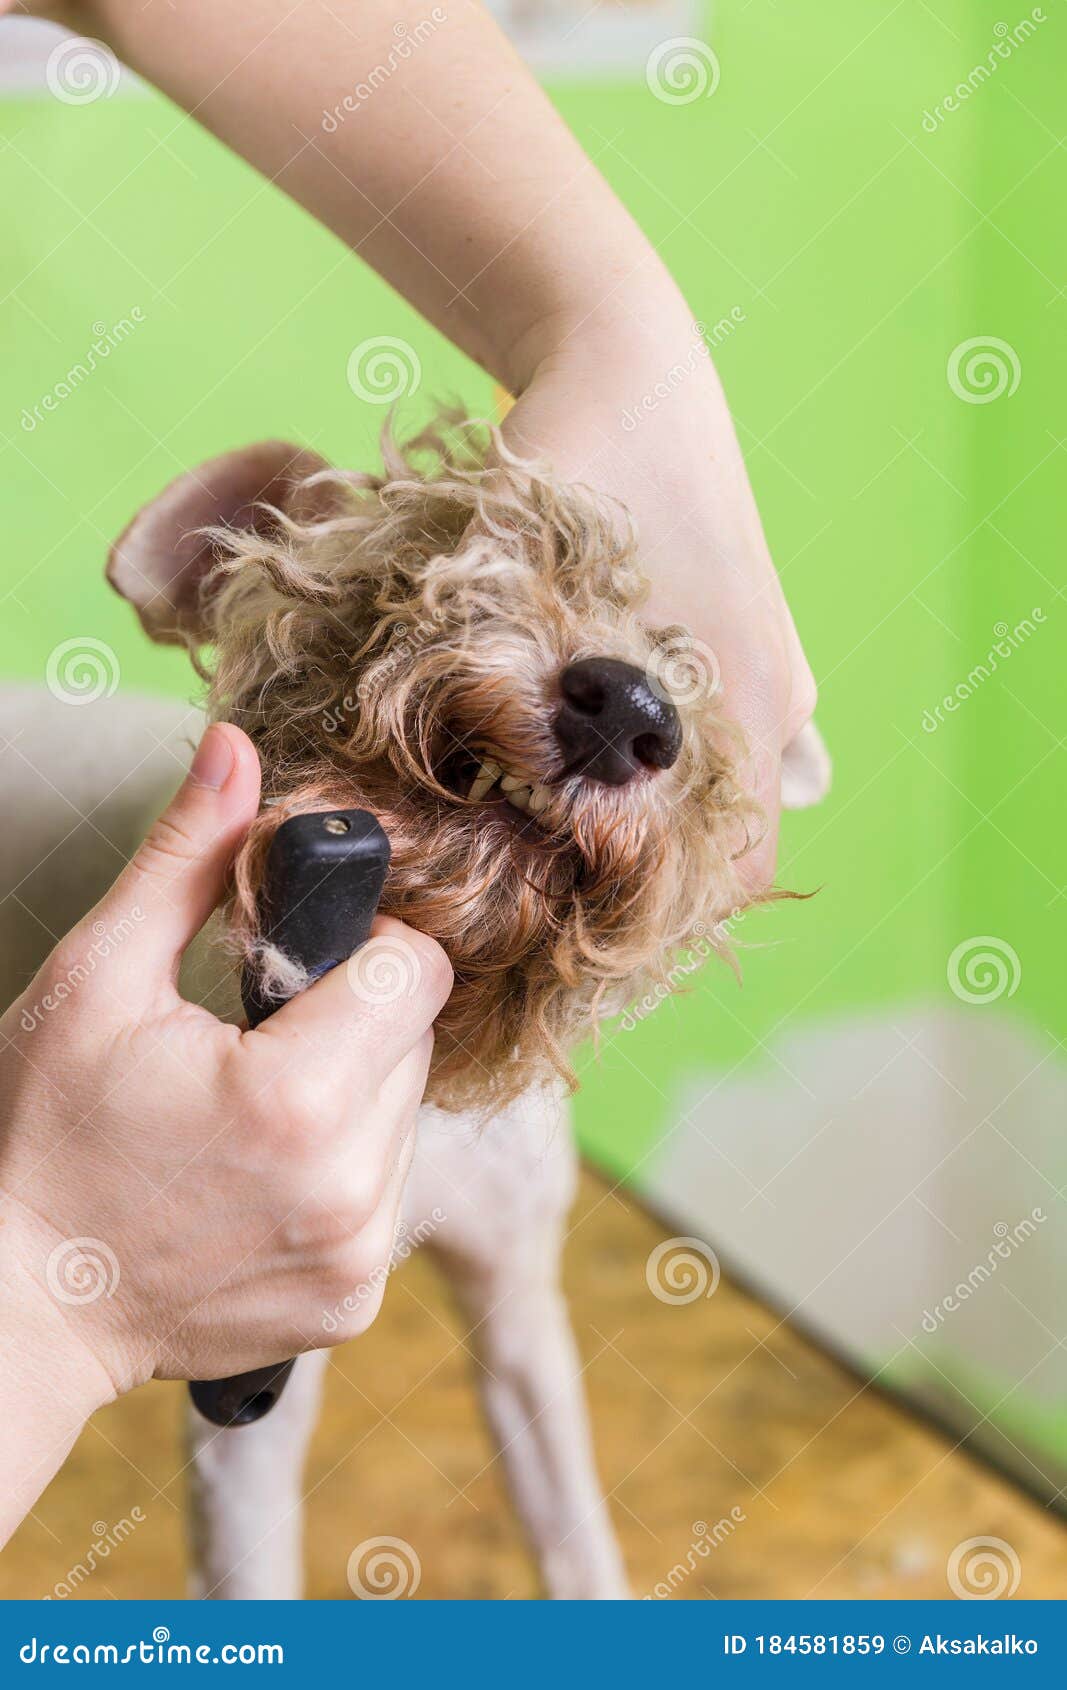 Combing Hair Brush on the Dog`s Face Stock Image - Image of procedure ...